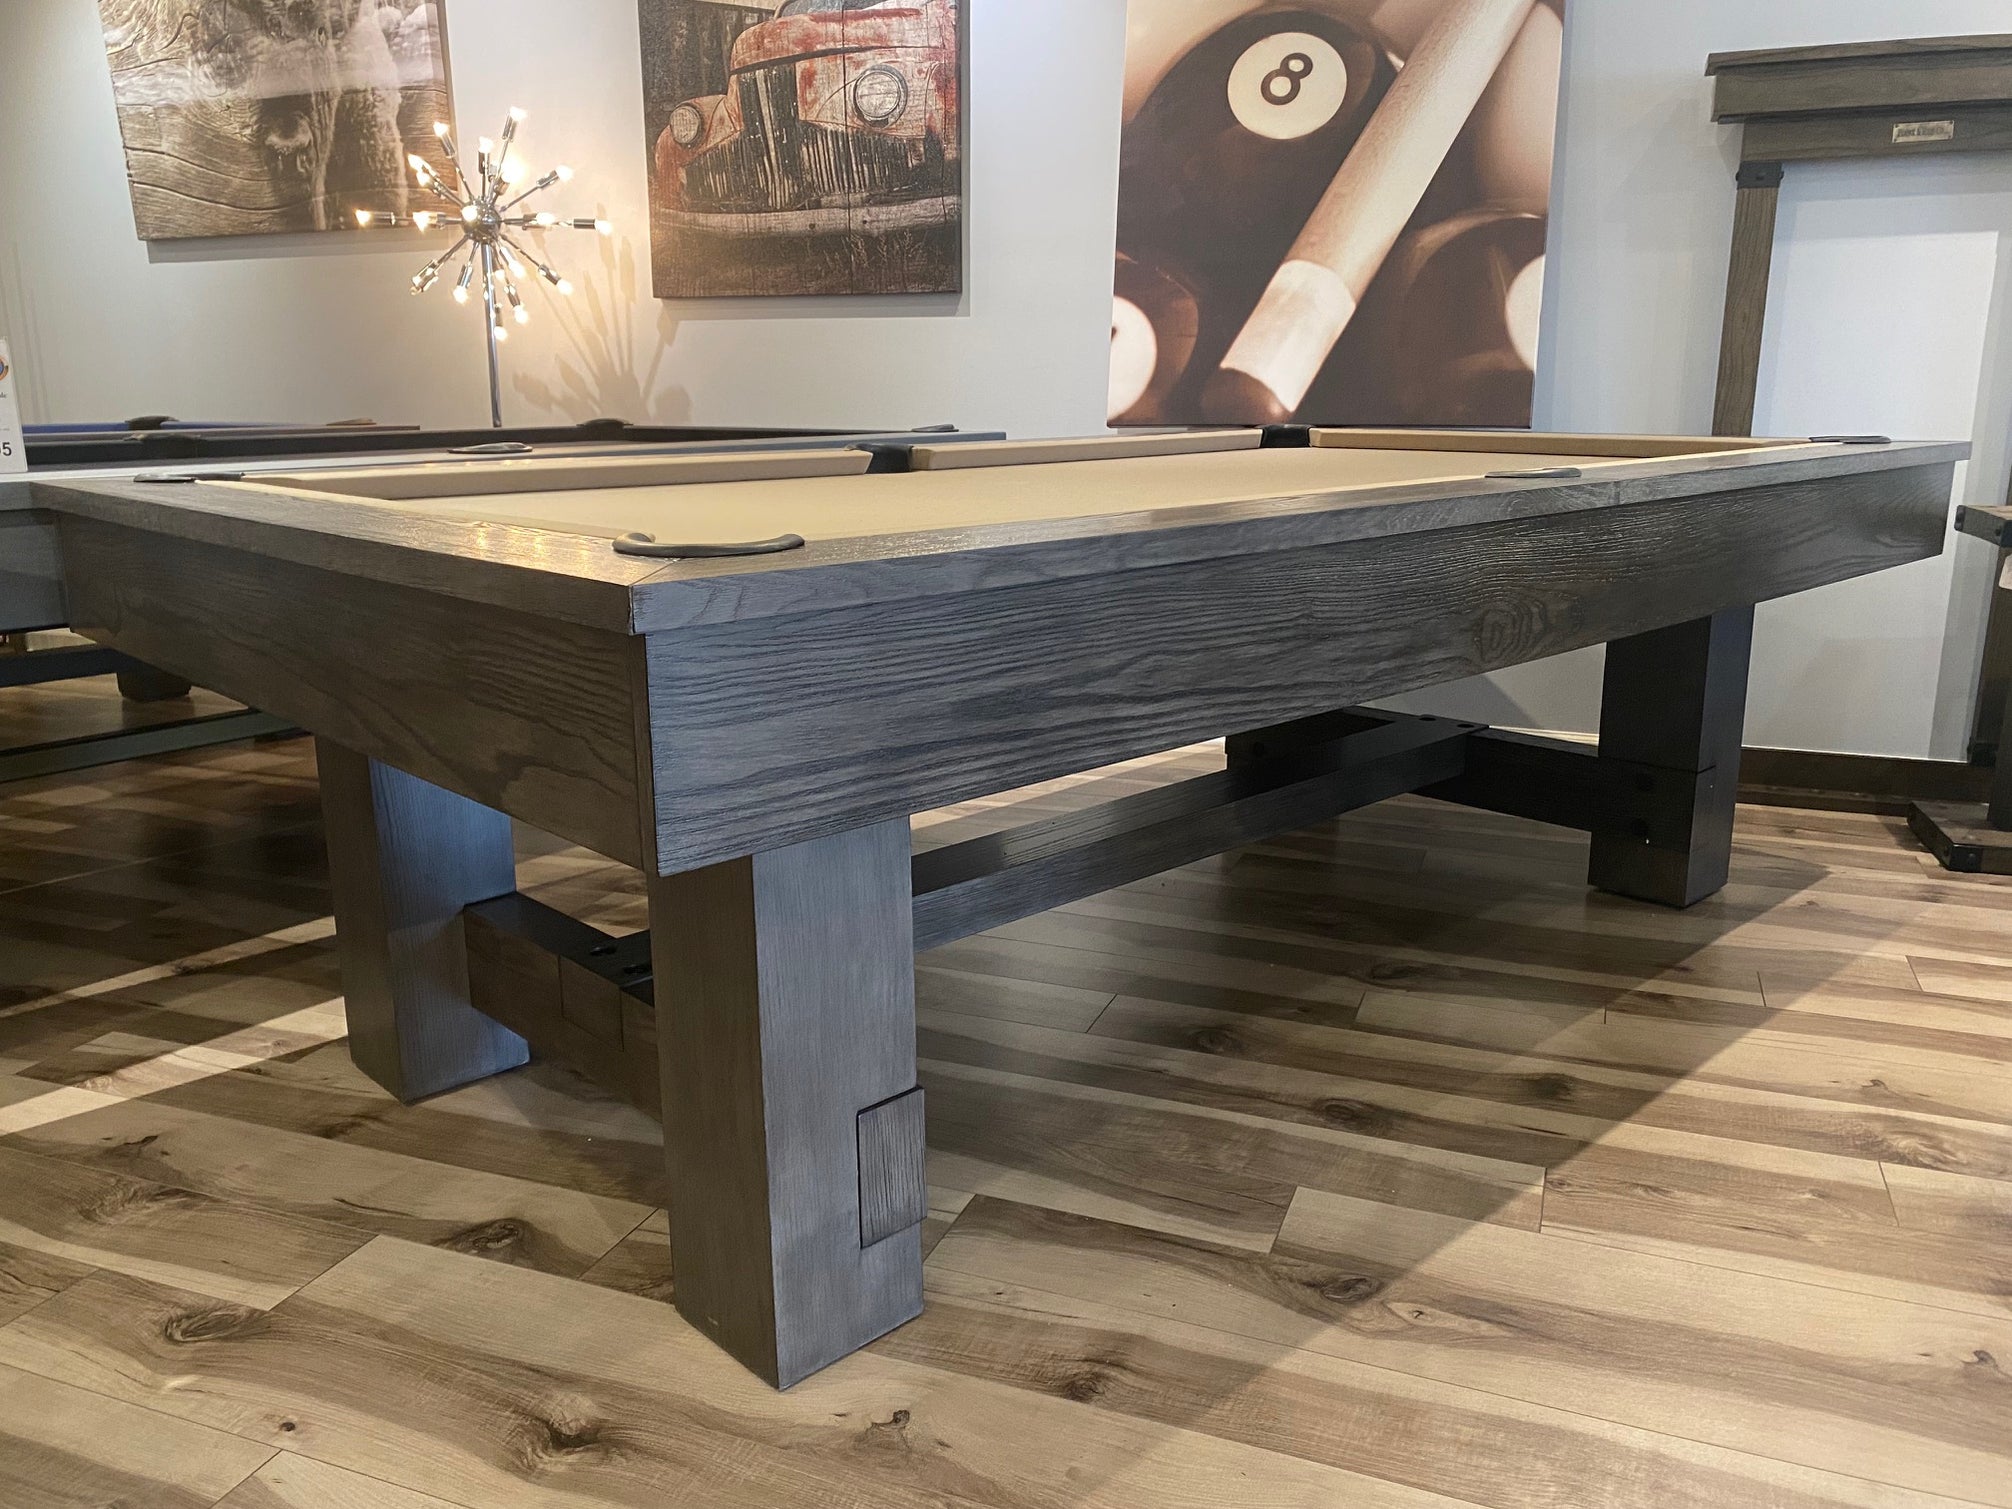 Robbies Billiards - pool tables & game room furniture since 1954